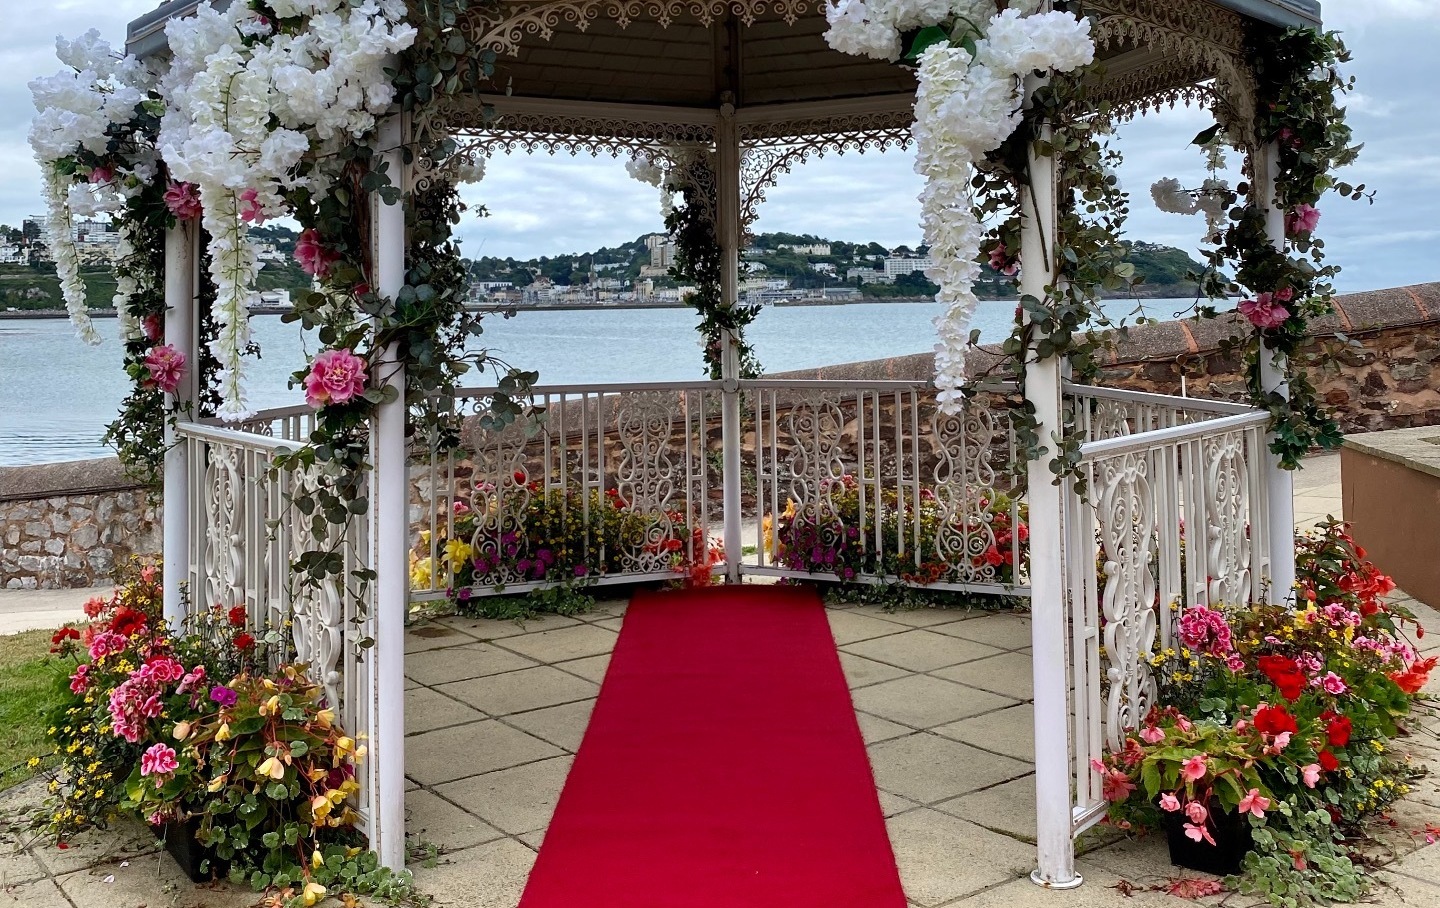 Wedding gazebo decorated in lots of flowers for a wedding ceremony